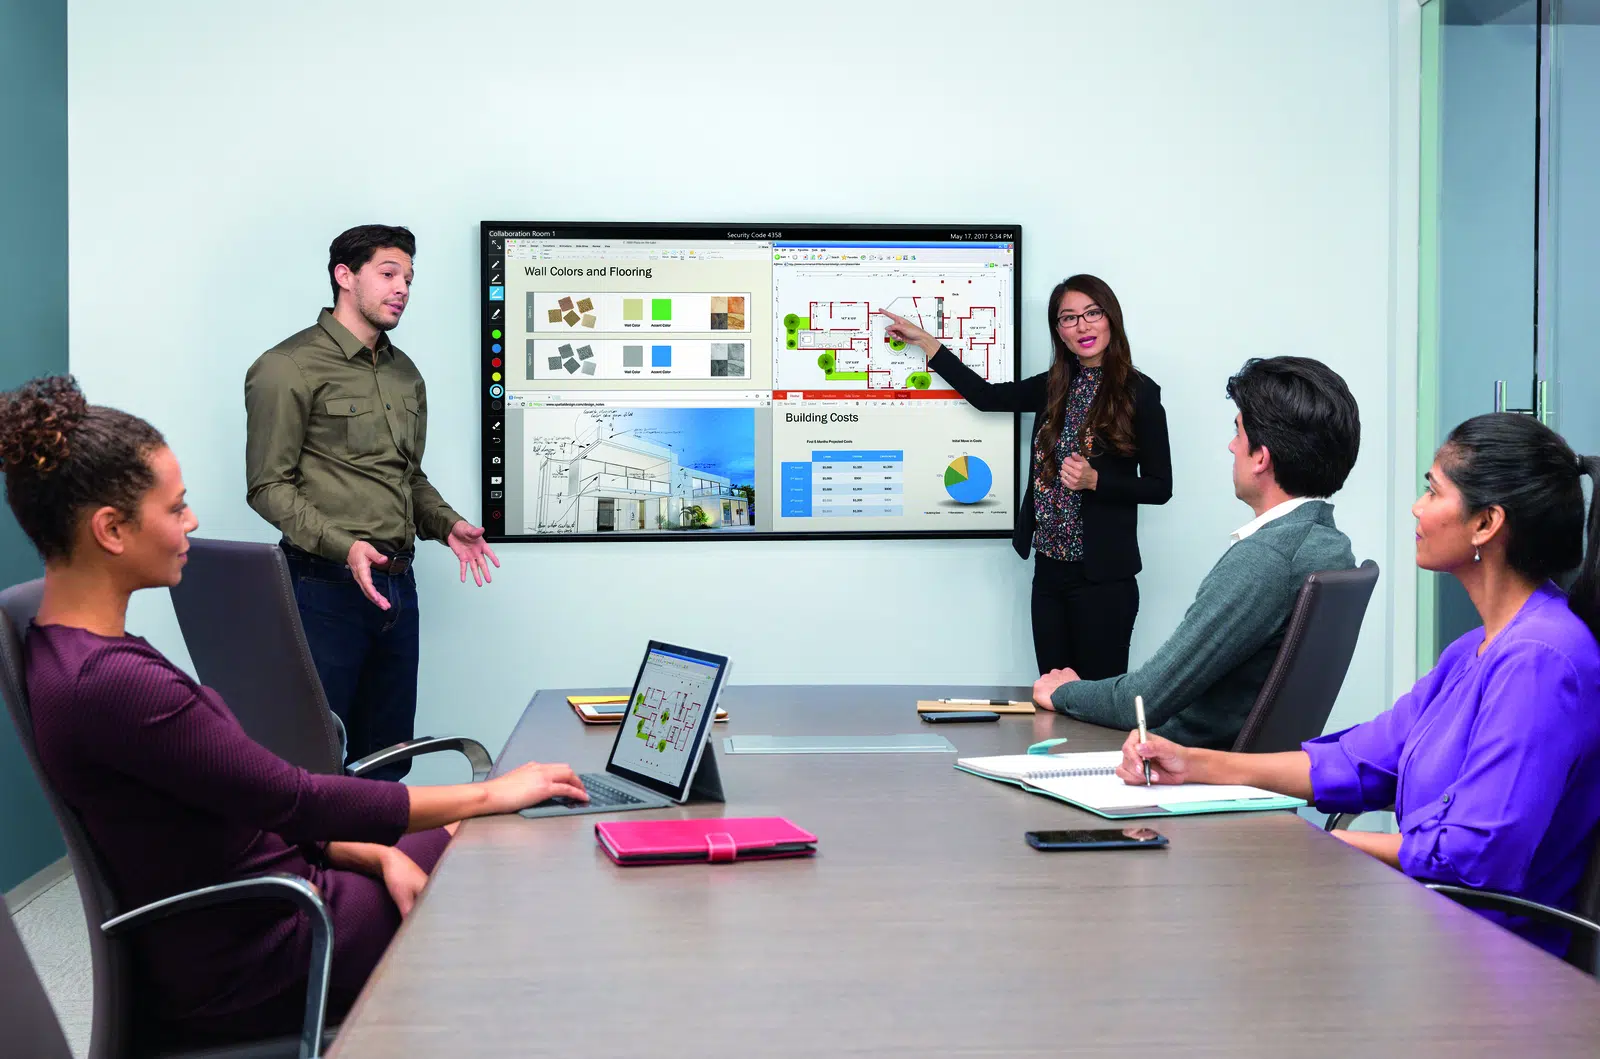 The Polycom Pano Is The Best Content Sharing & Presentation Device